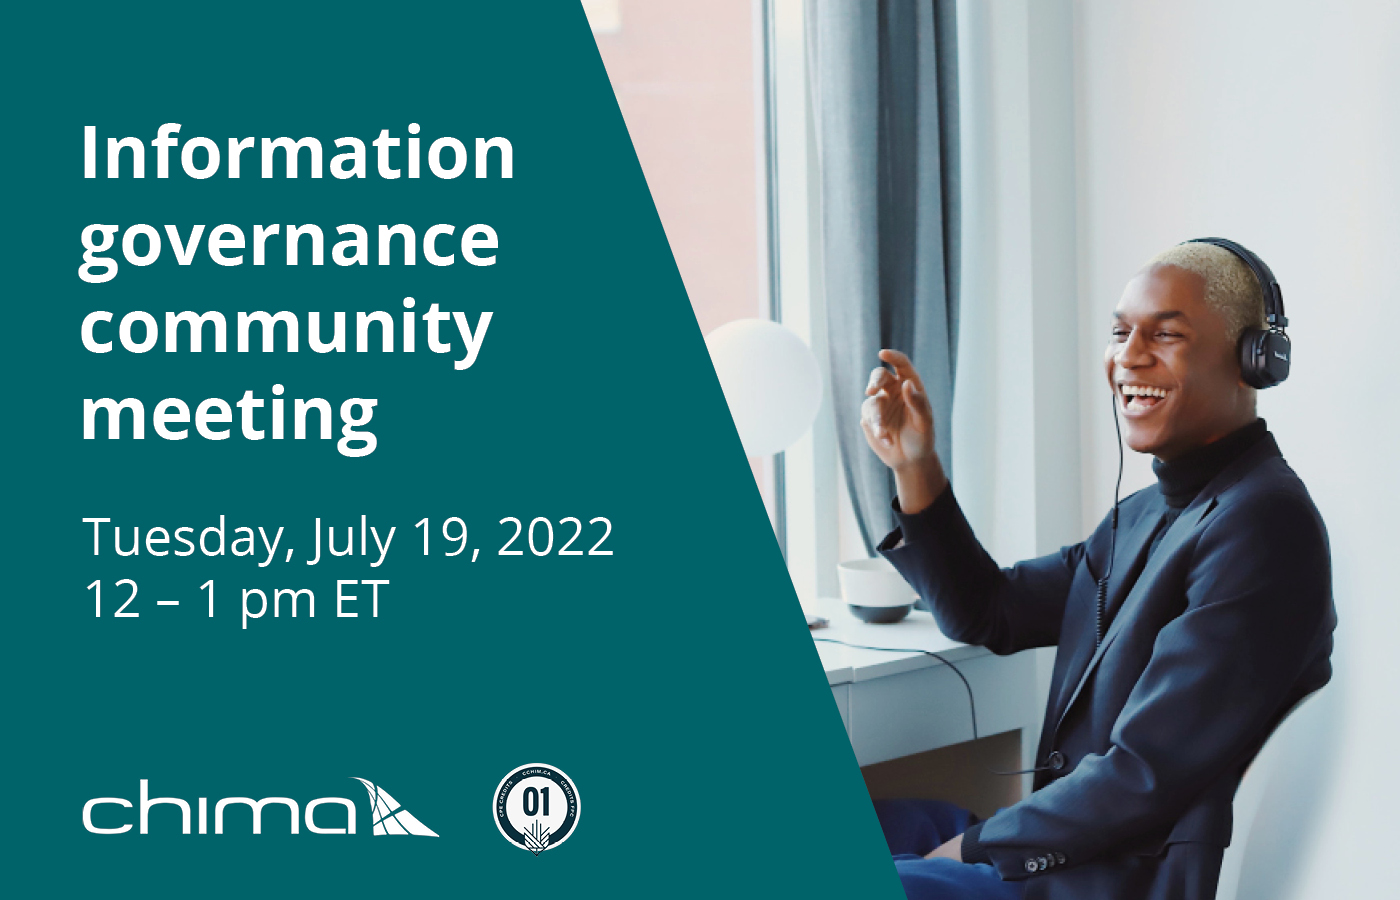 A banner for the CHIMA Information Governance Community meeting coming up on Tuesday, July 19 from 12 - 1 pm Eastern time. There's a turquoise background on the left half and an image of a black person smiling, wearing headphones. They're raising their left arm mid-laugh and wearing a black long sleeved shirt